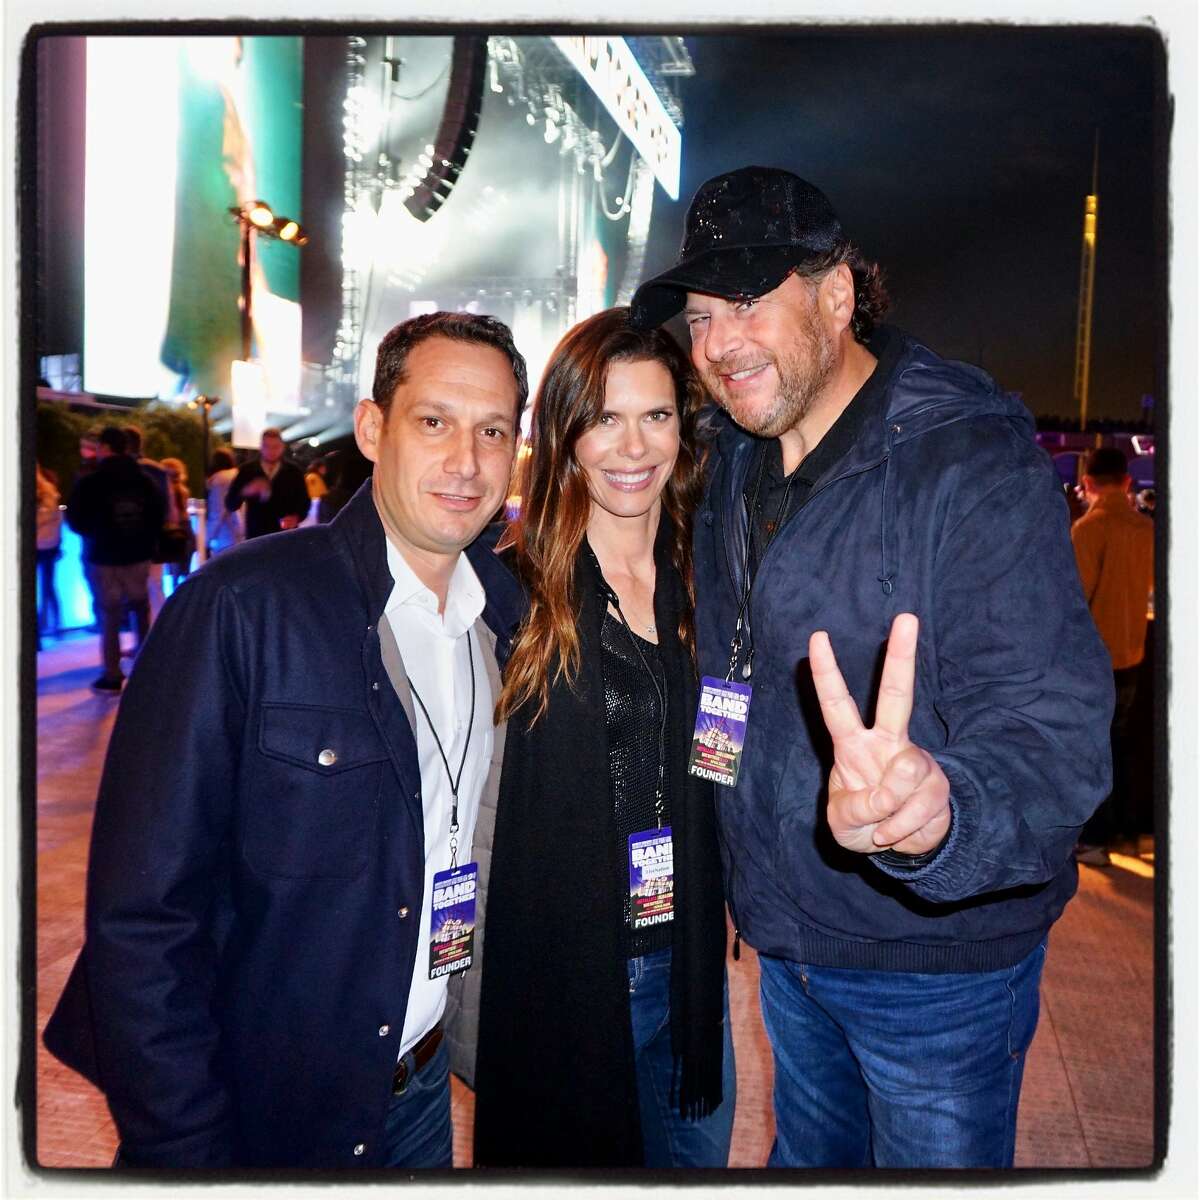 Tipping Point CEO Daniel Lurie (left) with philanthropist Lynne Benioff and her husband, Salesforce CEO Marc Benioff at AT&T Park for Band Together. Nov. 9, 2017.